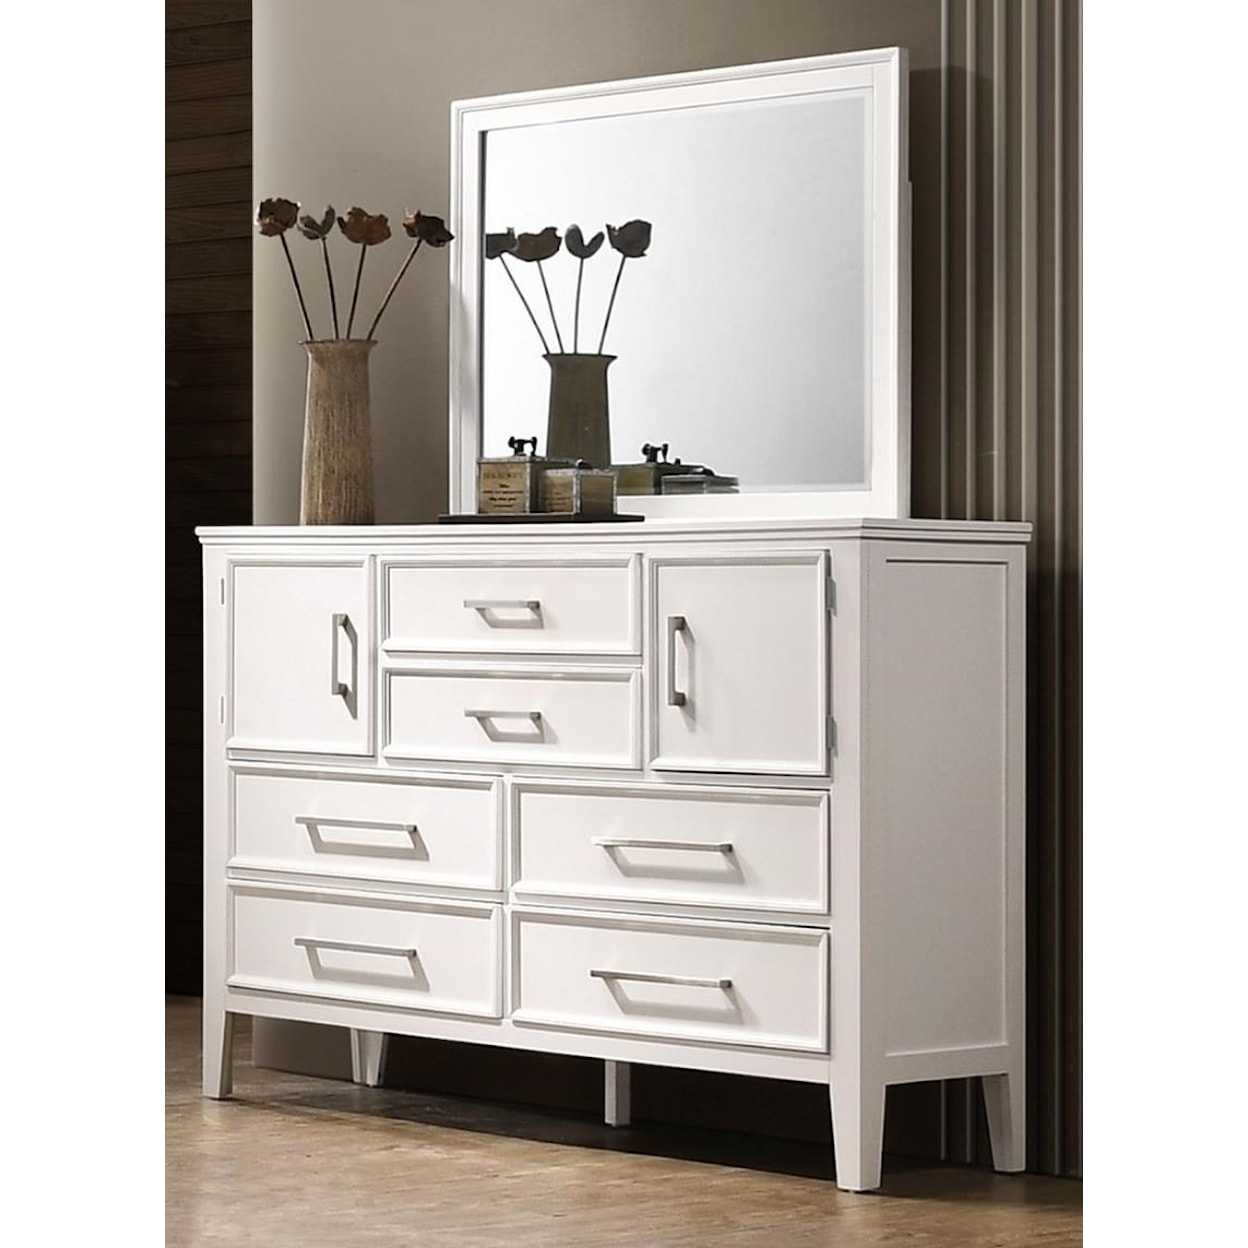 New Classic Andover Dresser and Mirror Set